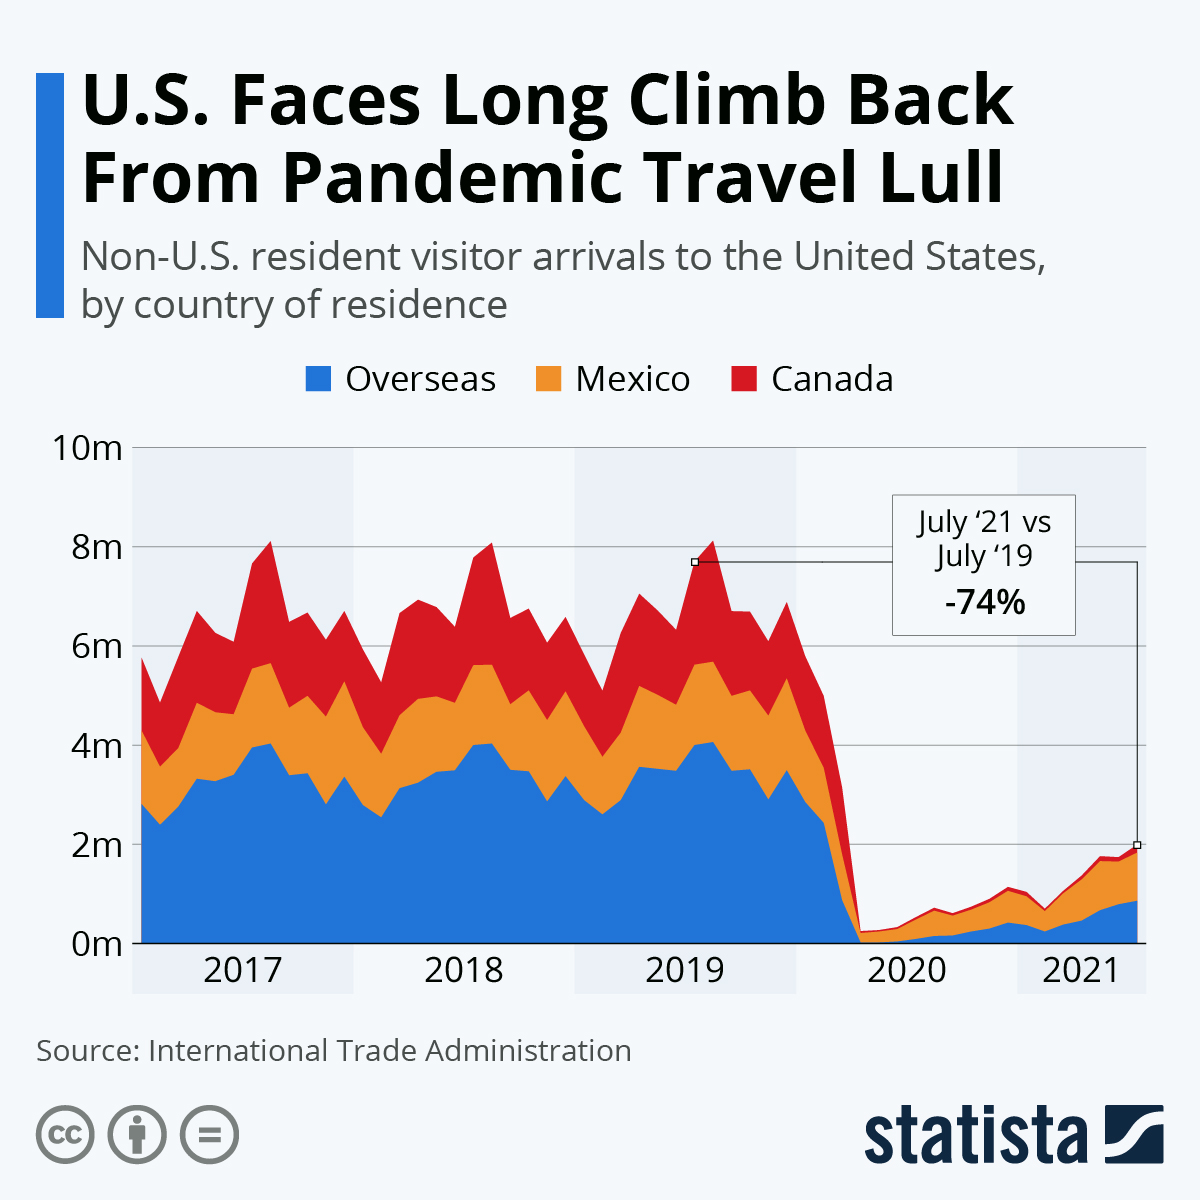 U.S. Faces Long Climb Back From Pandemic Travel Lull